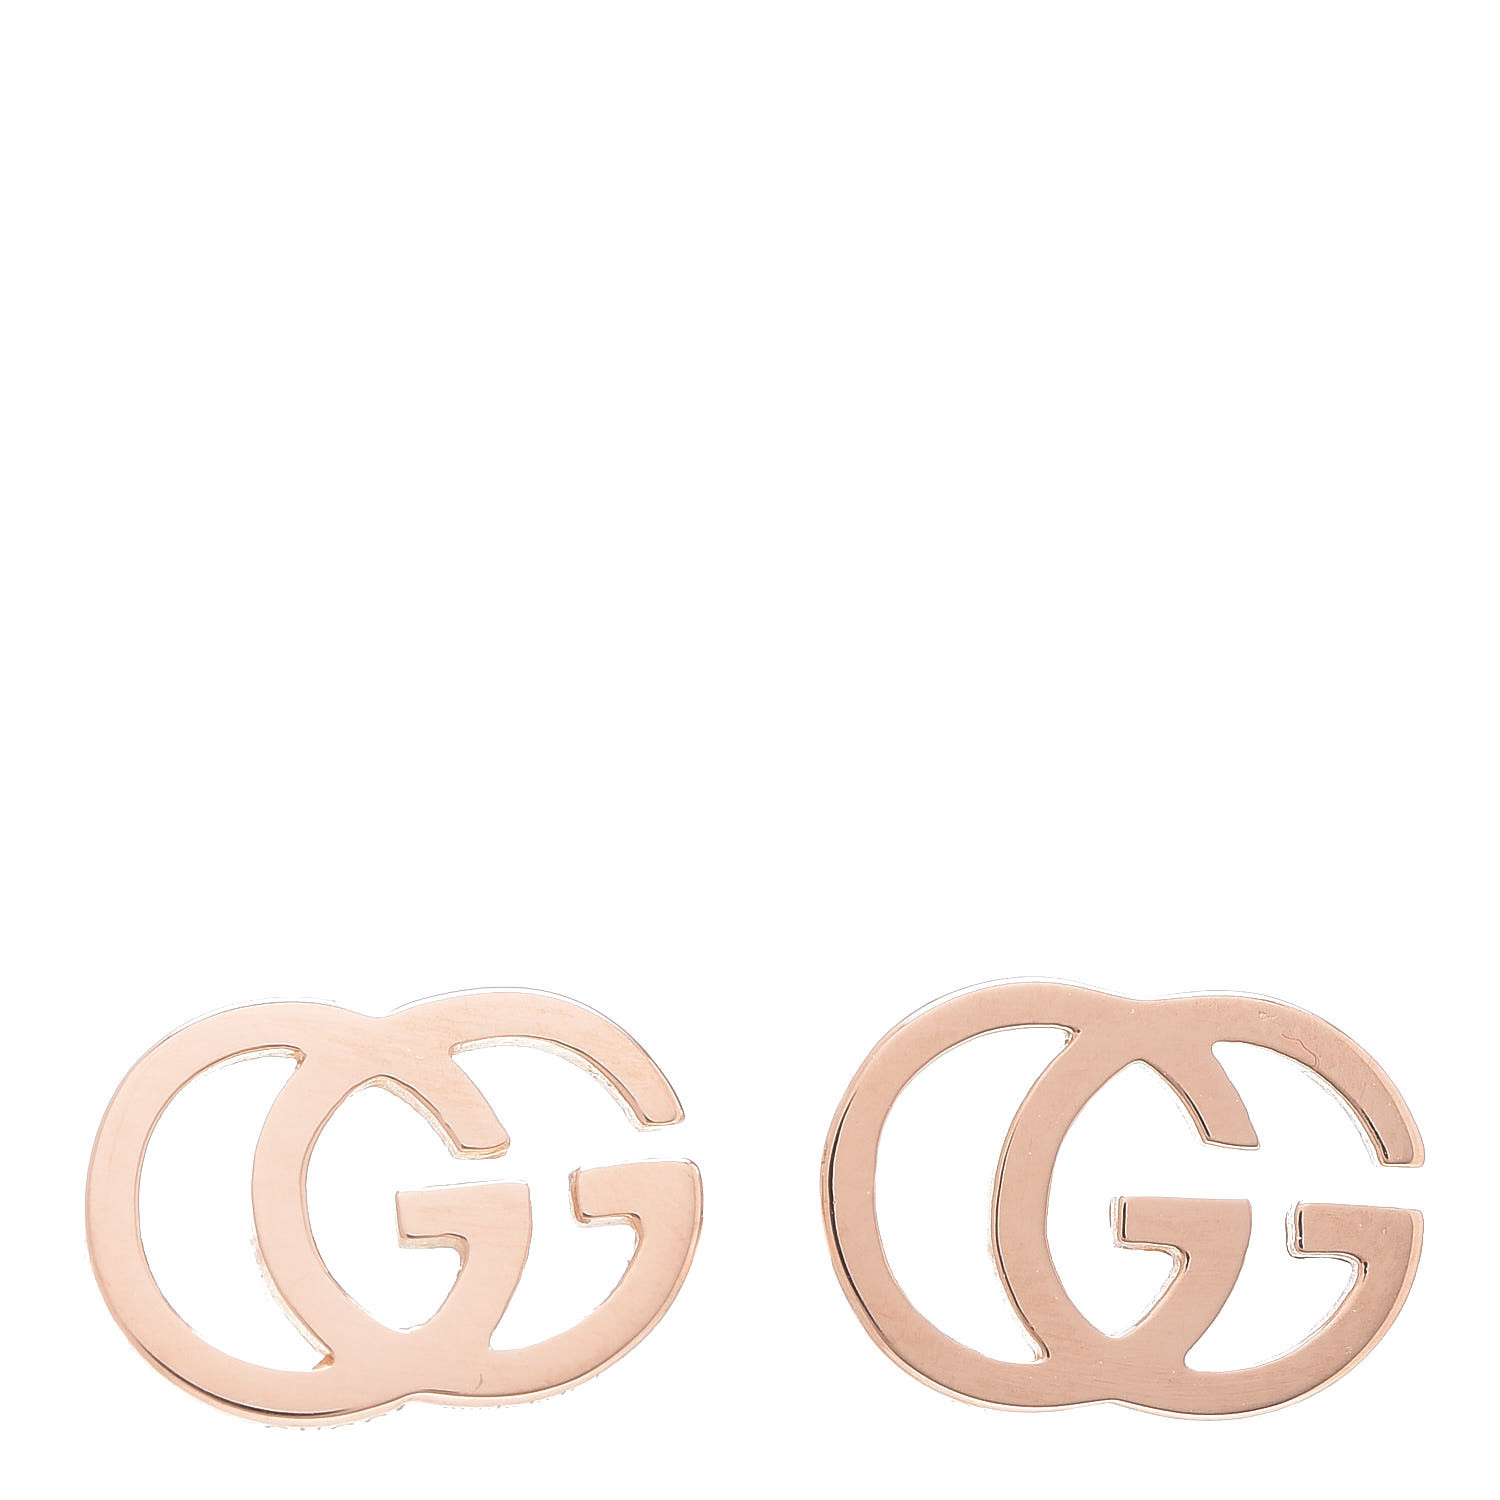 gucci rose gold earrings 